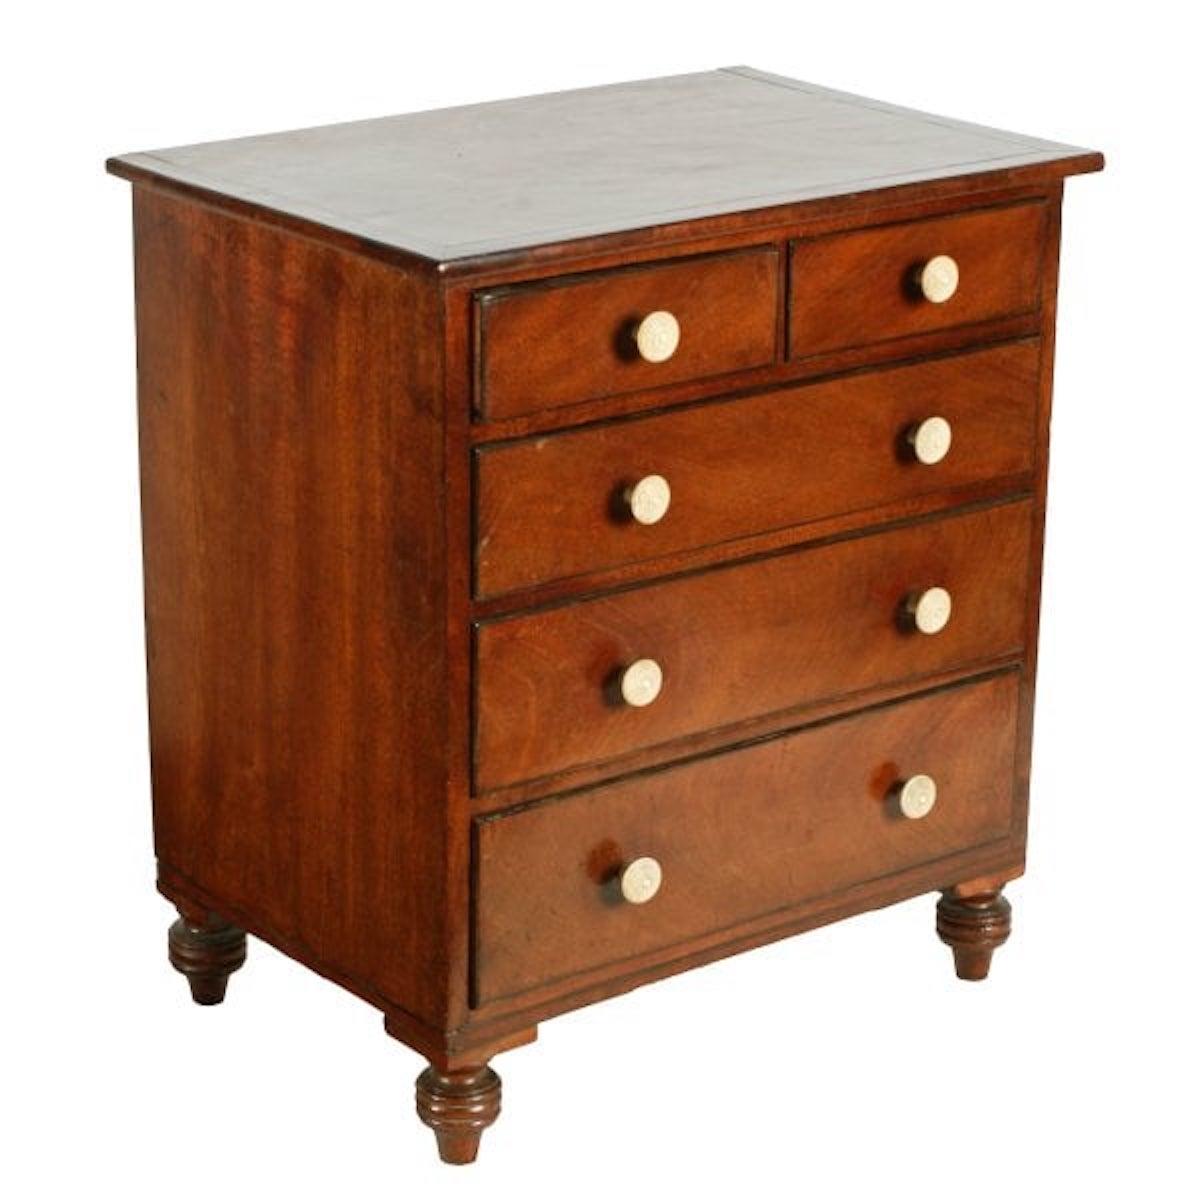 Regency miniature chest of drawers

An early 19th century Regency miniature mahogany chest of drawers.

The chest is possibly an apprentice piece and has a figured mahogany top with line inlay and five drawers with matching inlay to the